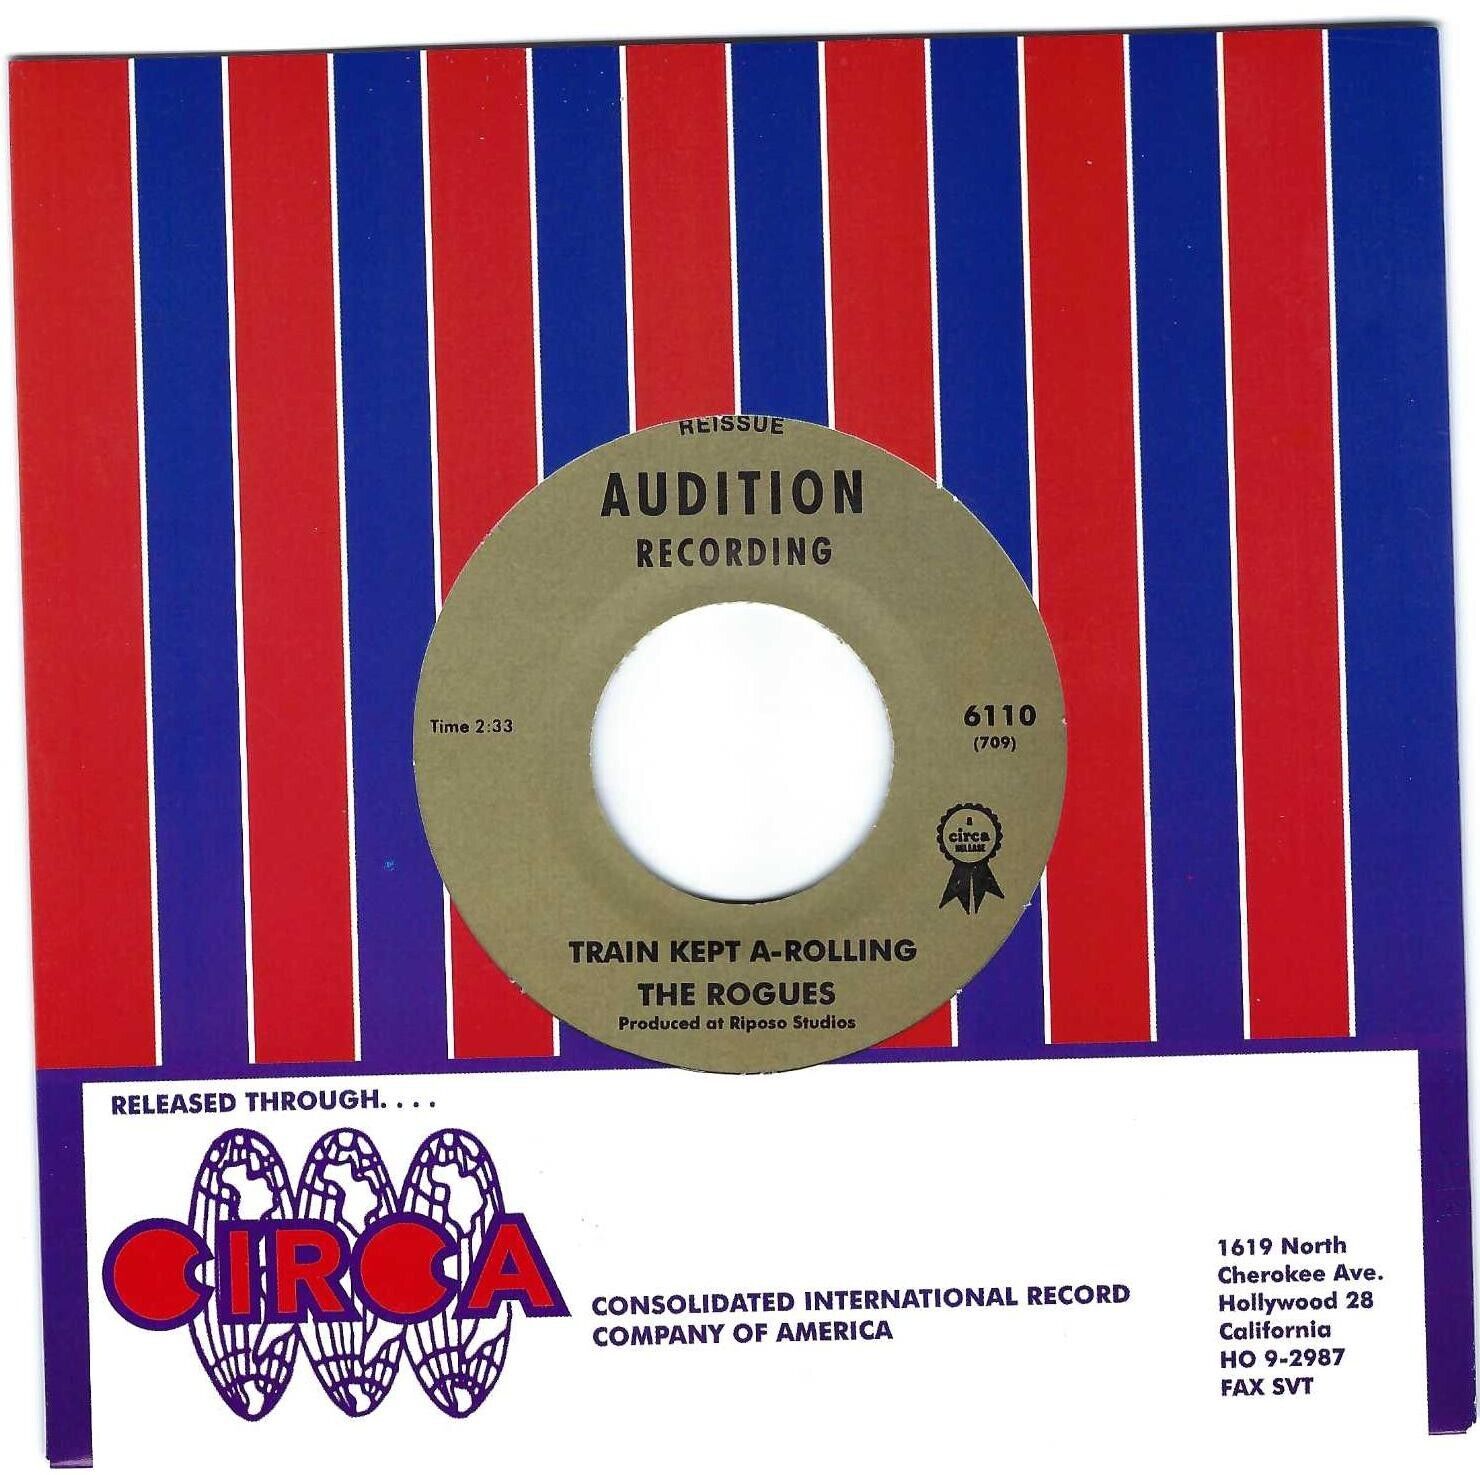 Reissue 45 rpm Garage-Rogues-Train Kept A Rolling-Audition 6110